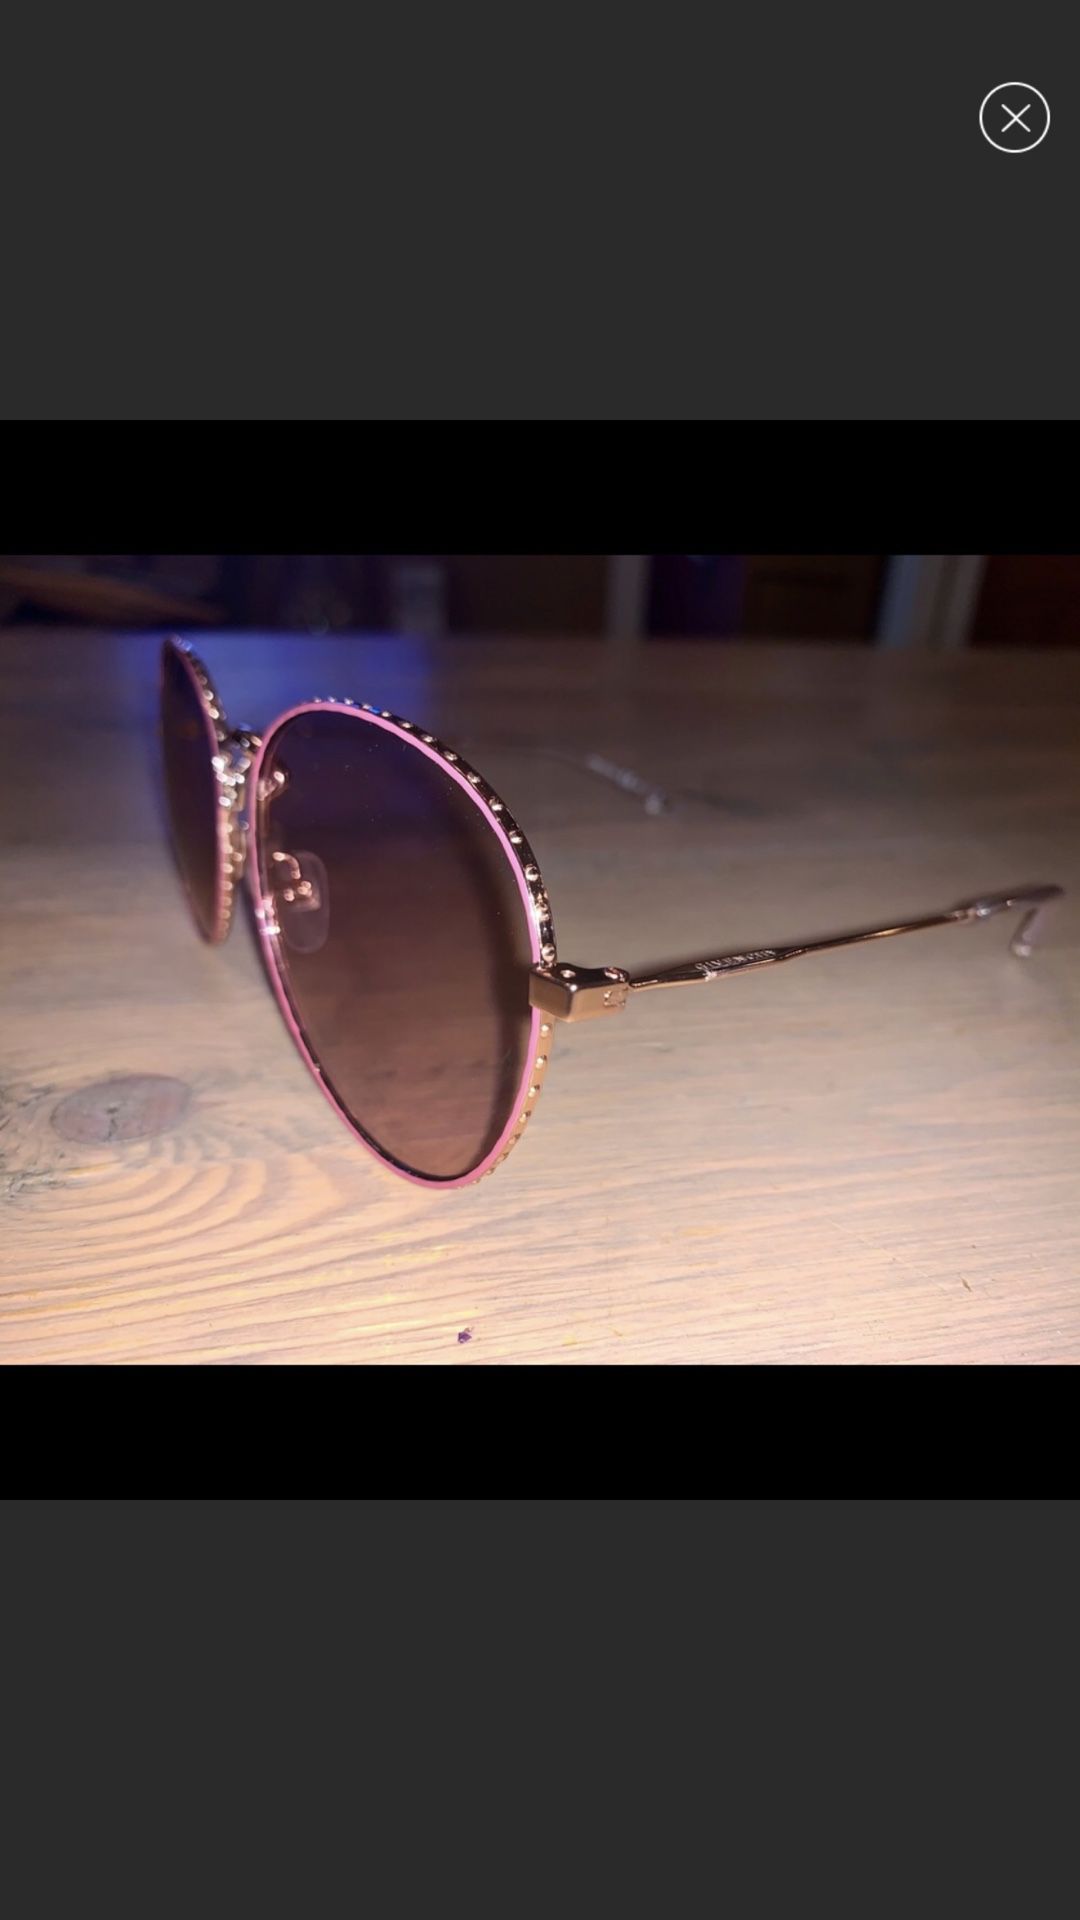 Authentic Givenchy sunglasses